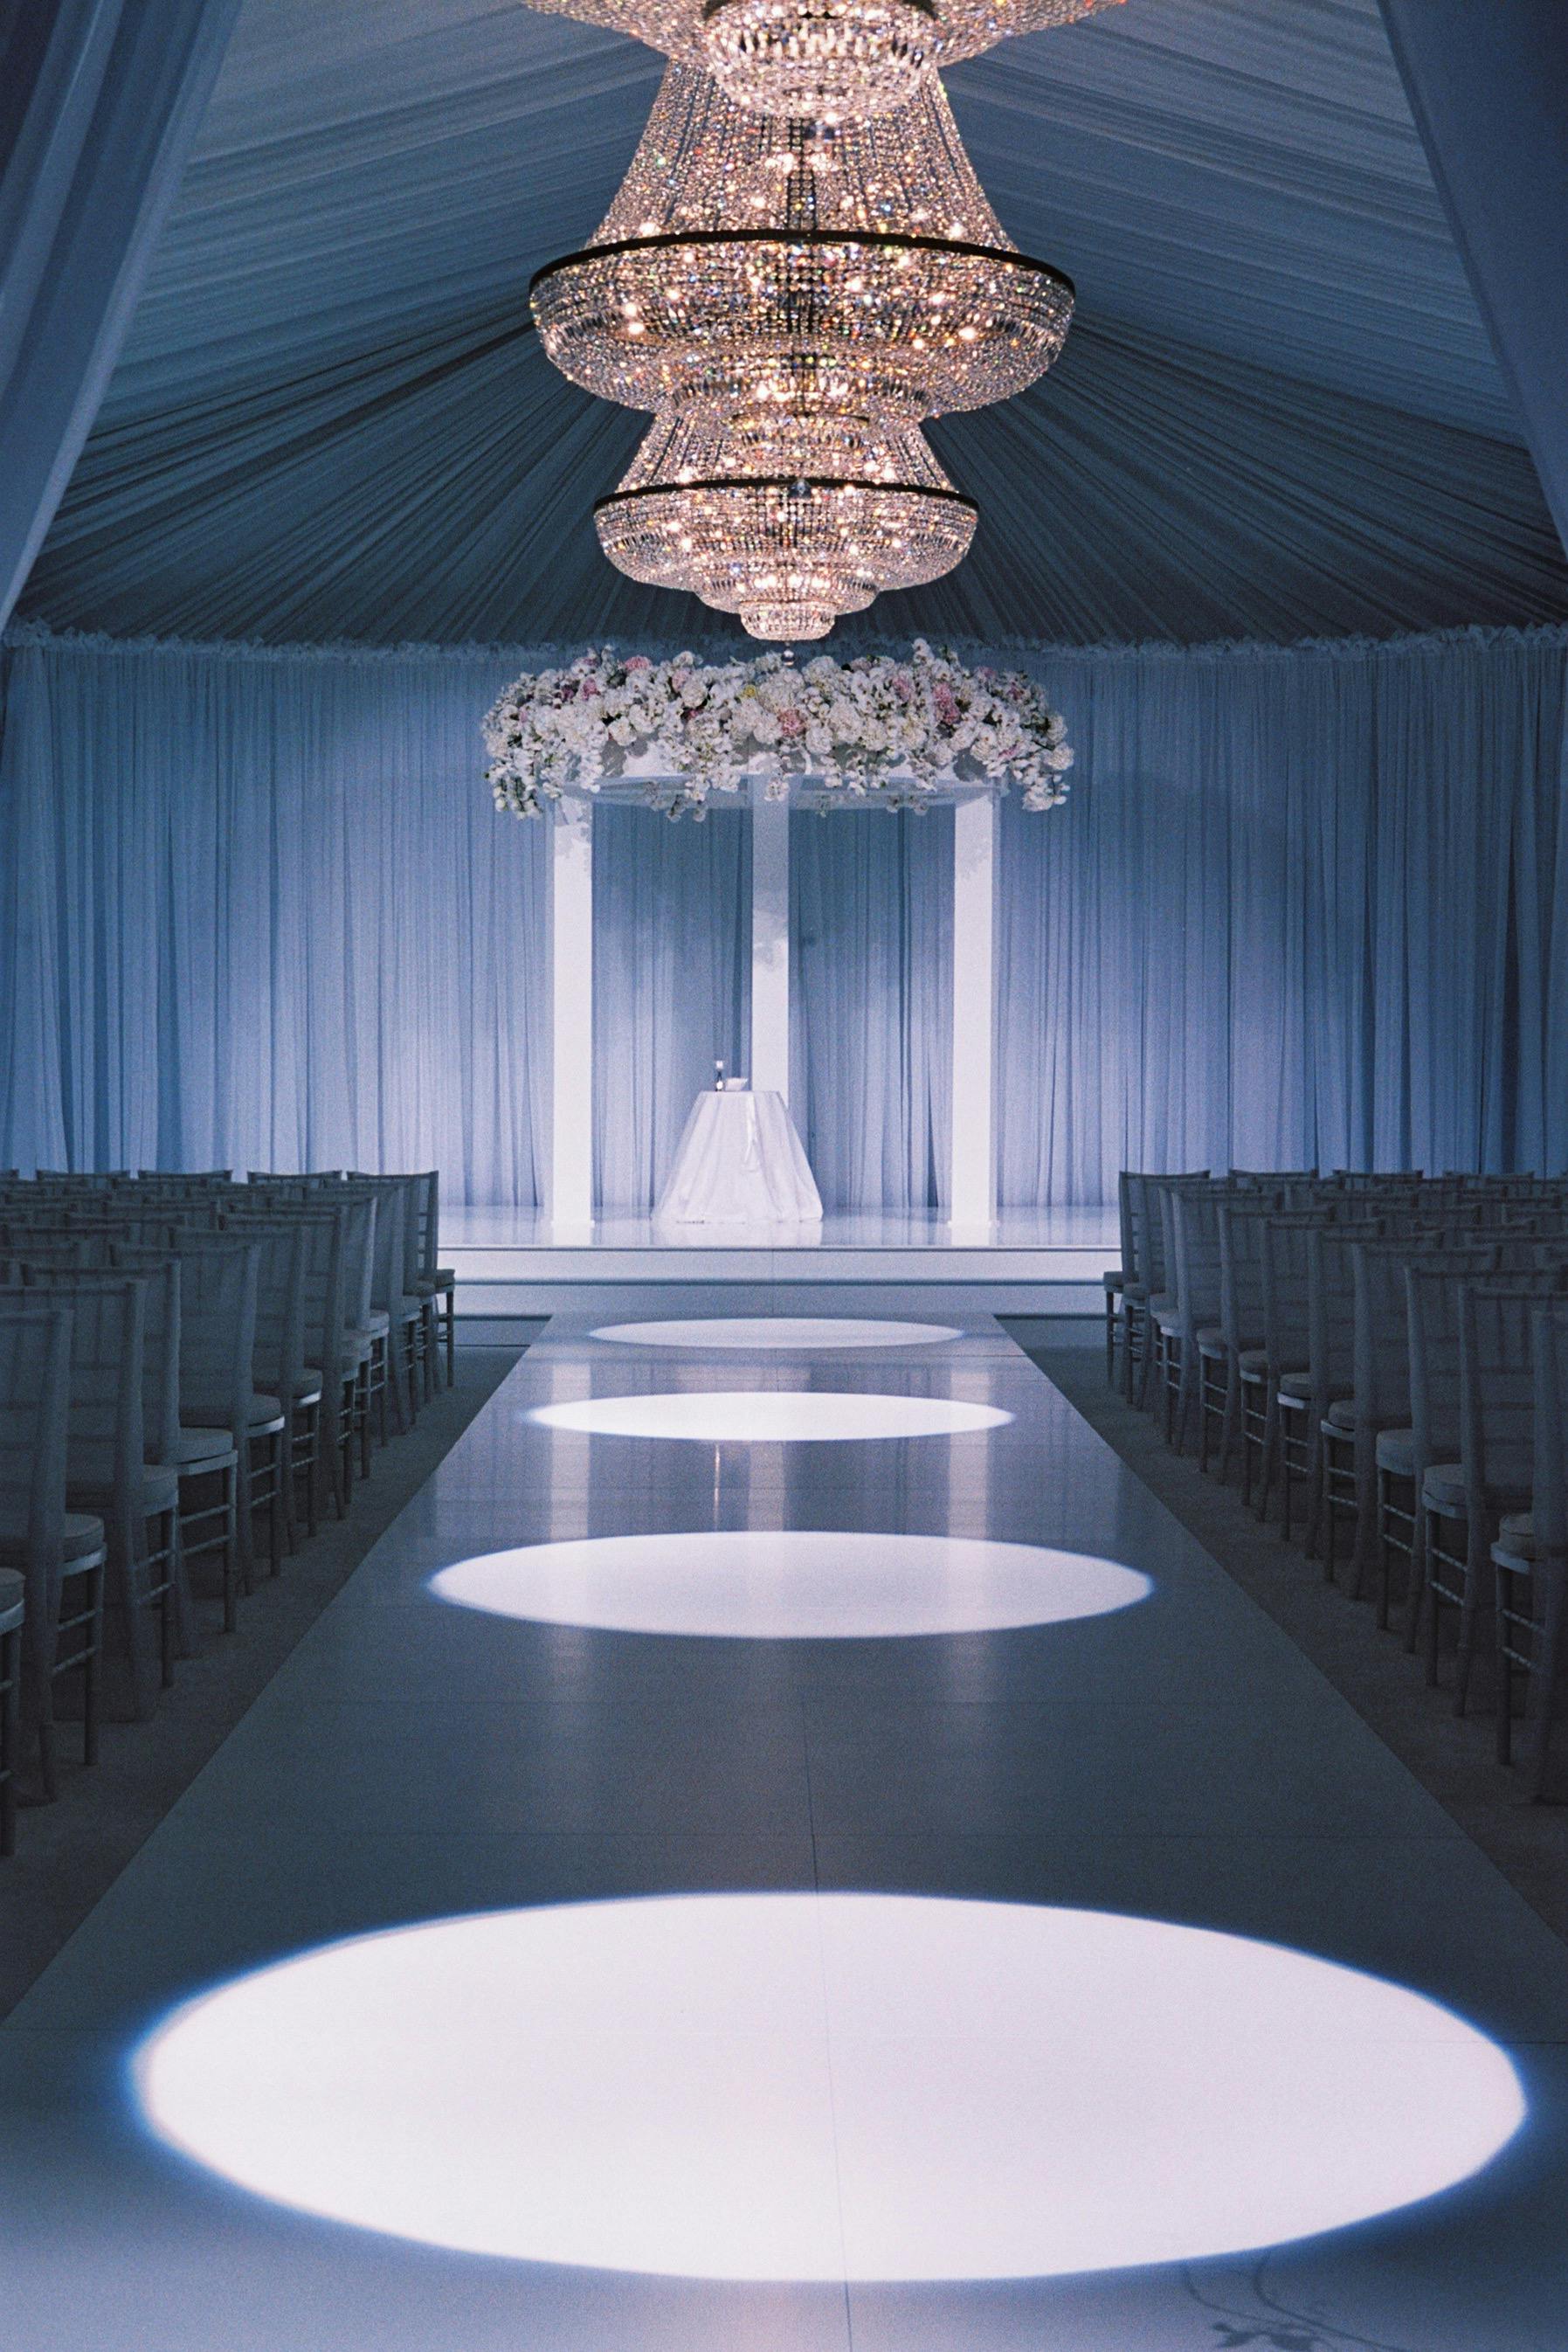 Stunning Tented Wedding with Unique Wedding Aisle Featuring Consecutive Spotlights | PartySlate